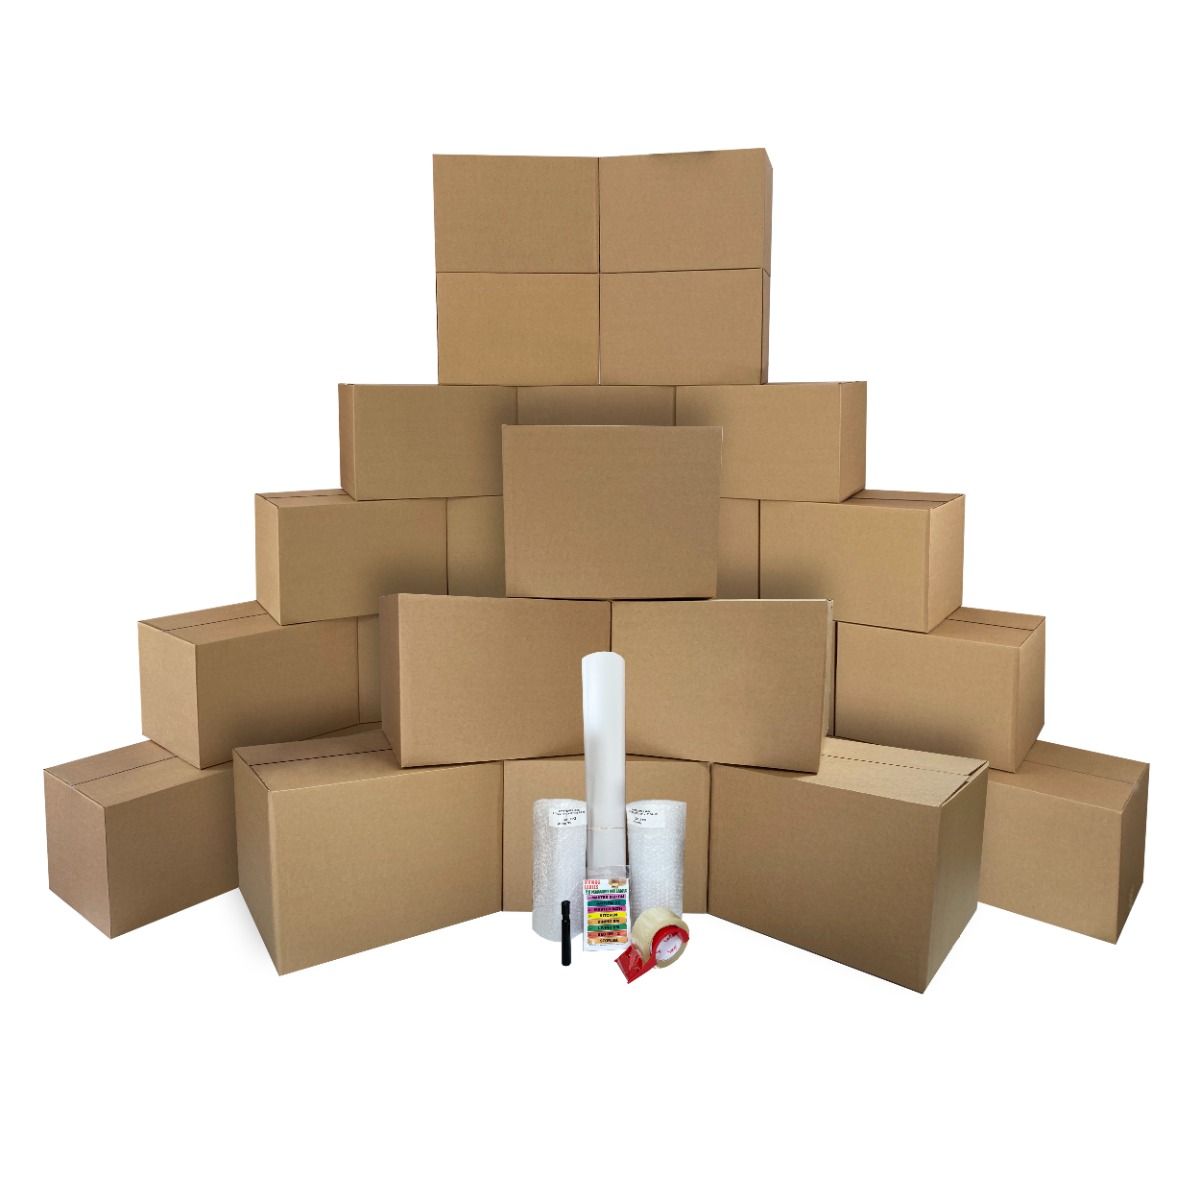 UBOXES Large Moving Boxes 20 x 20 x 15 (Pack of 6)